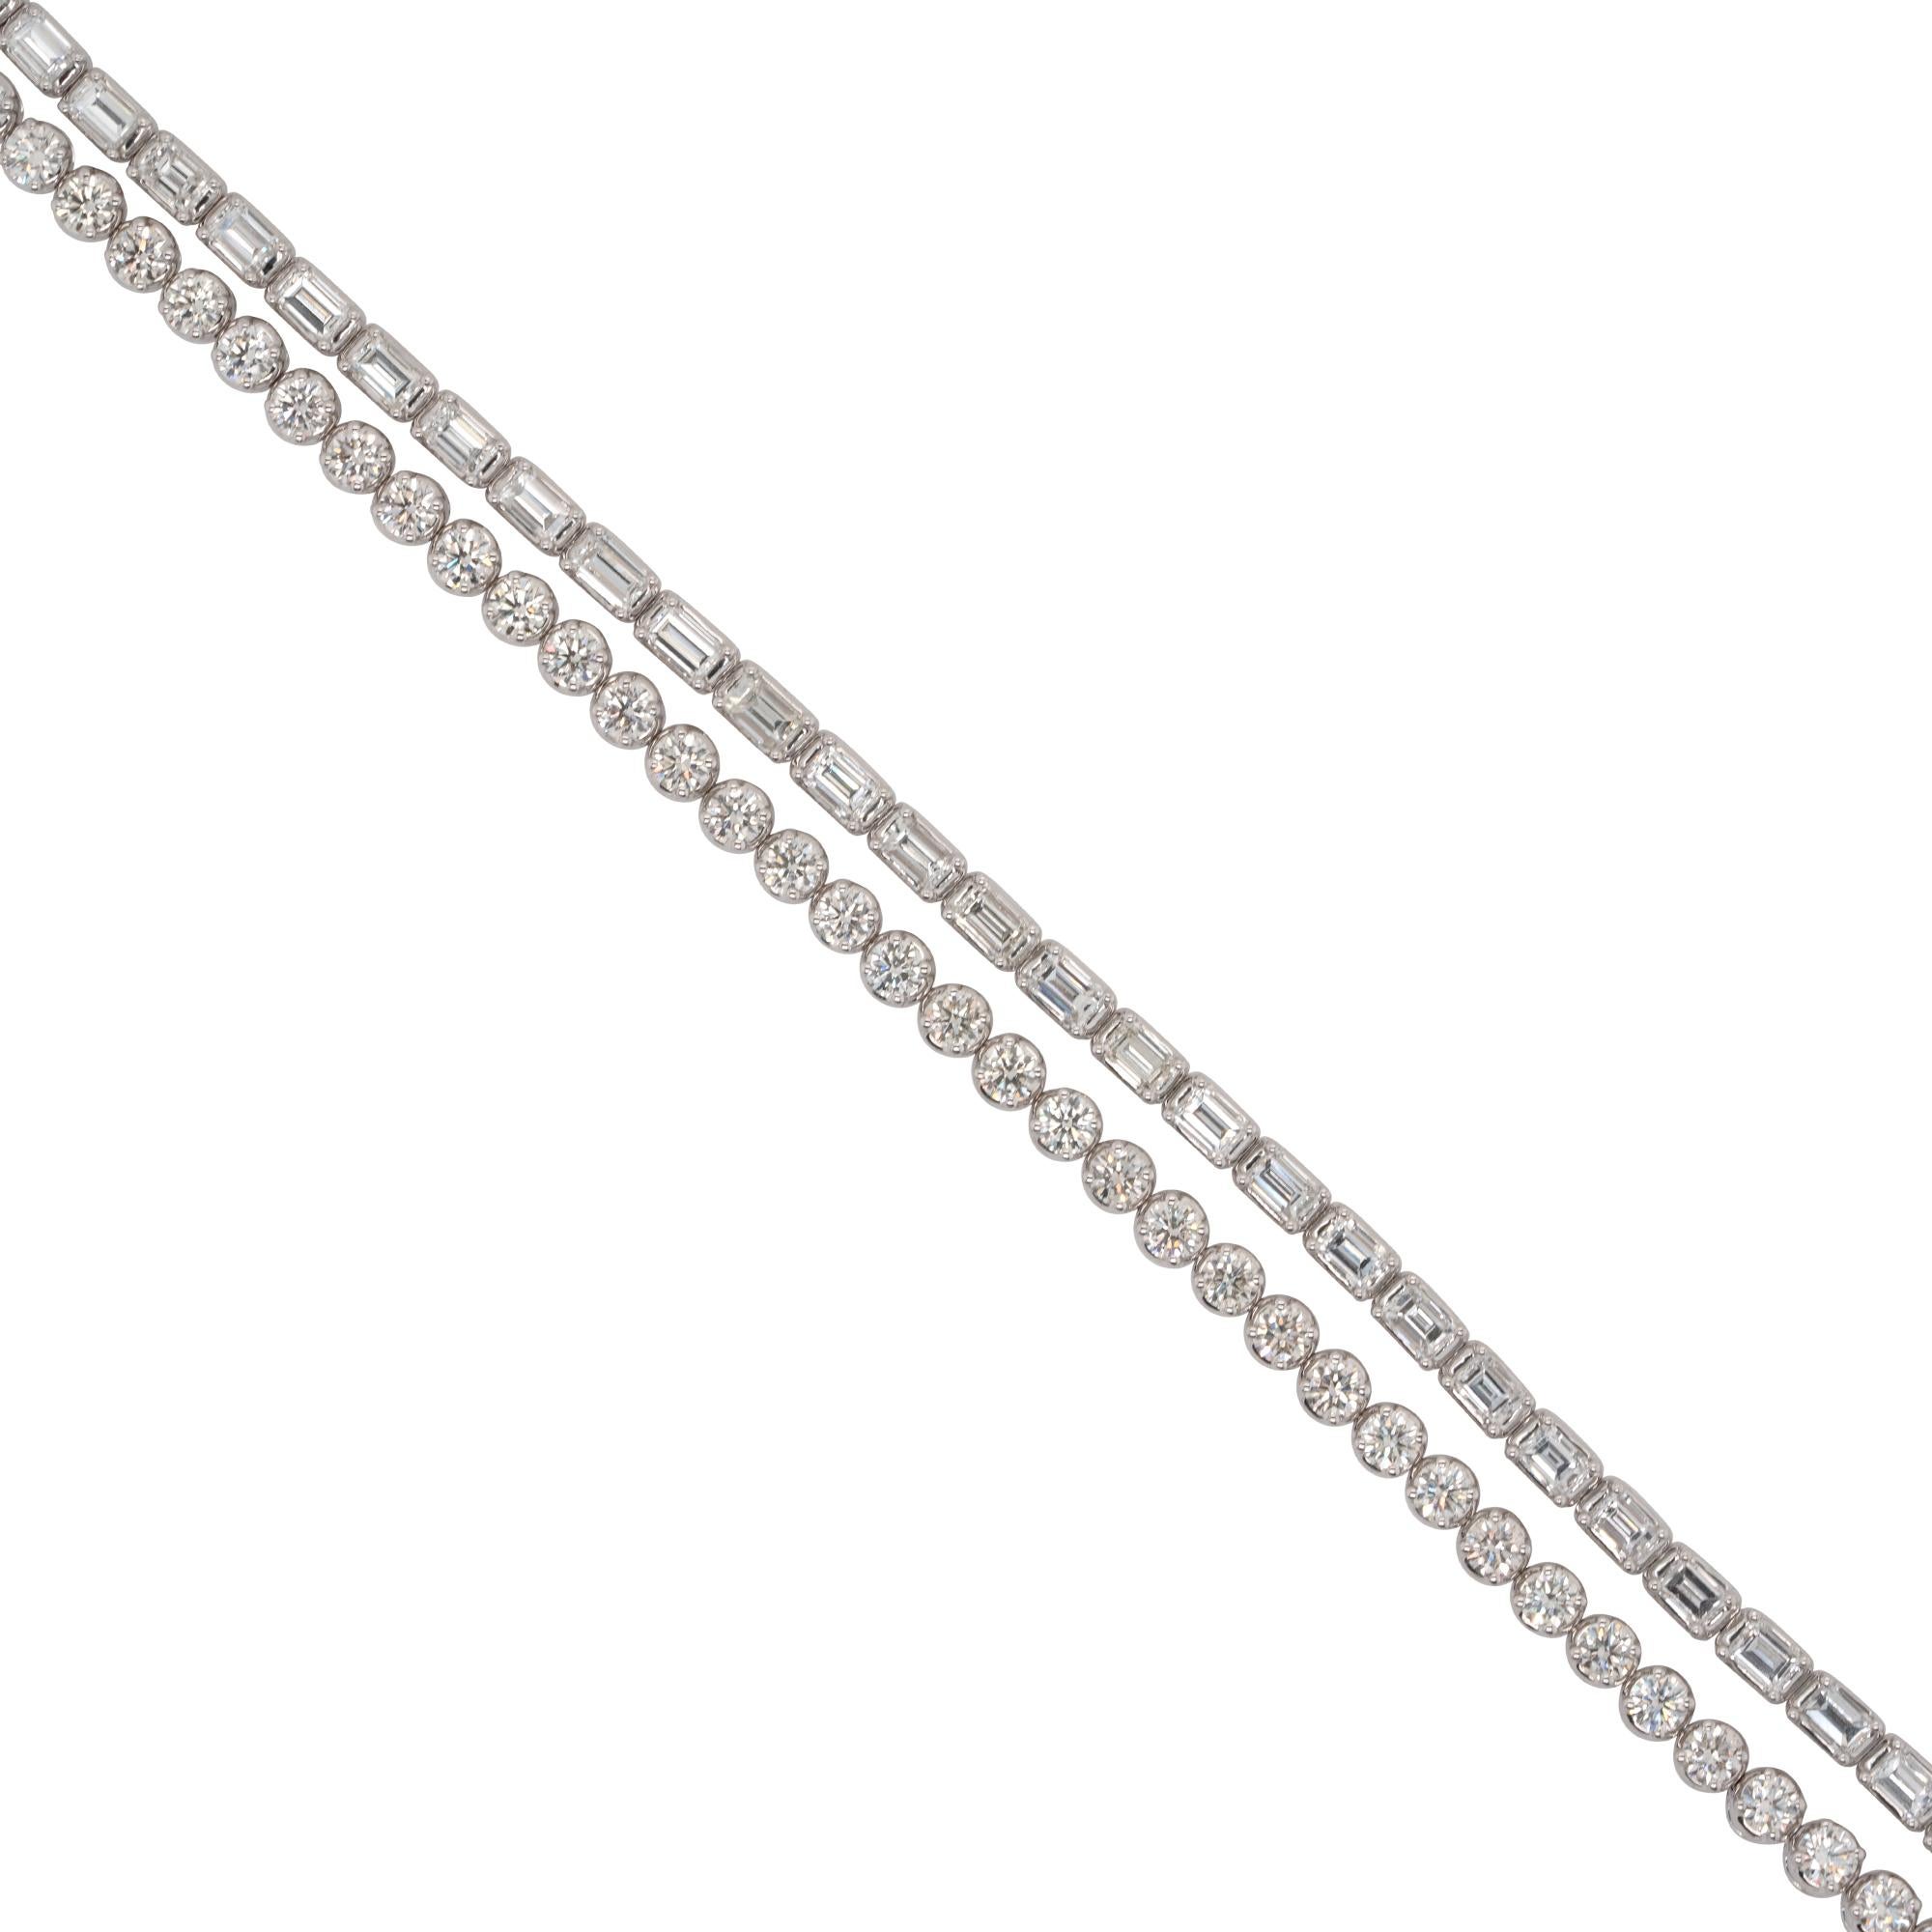 Material: 18k white gold
Diamond Details: Approx. 9.17ctw of round & baguette cut Diamonds. Diamonds are G/H in color and VS in clarity
Bracelet Measurements: 7 inches in length
Total Weight: 19.4g (12.5dwt)
Additional Details: This item comes with